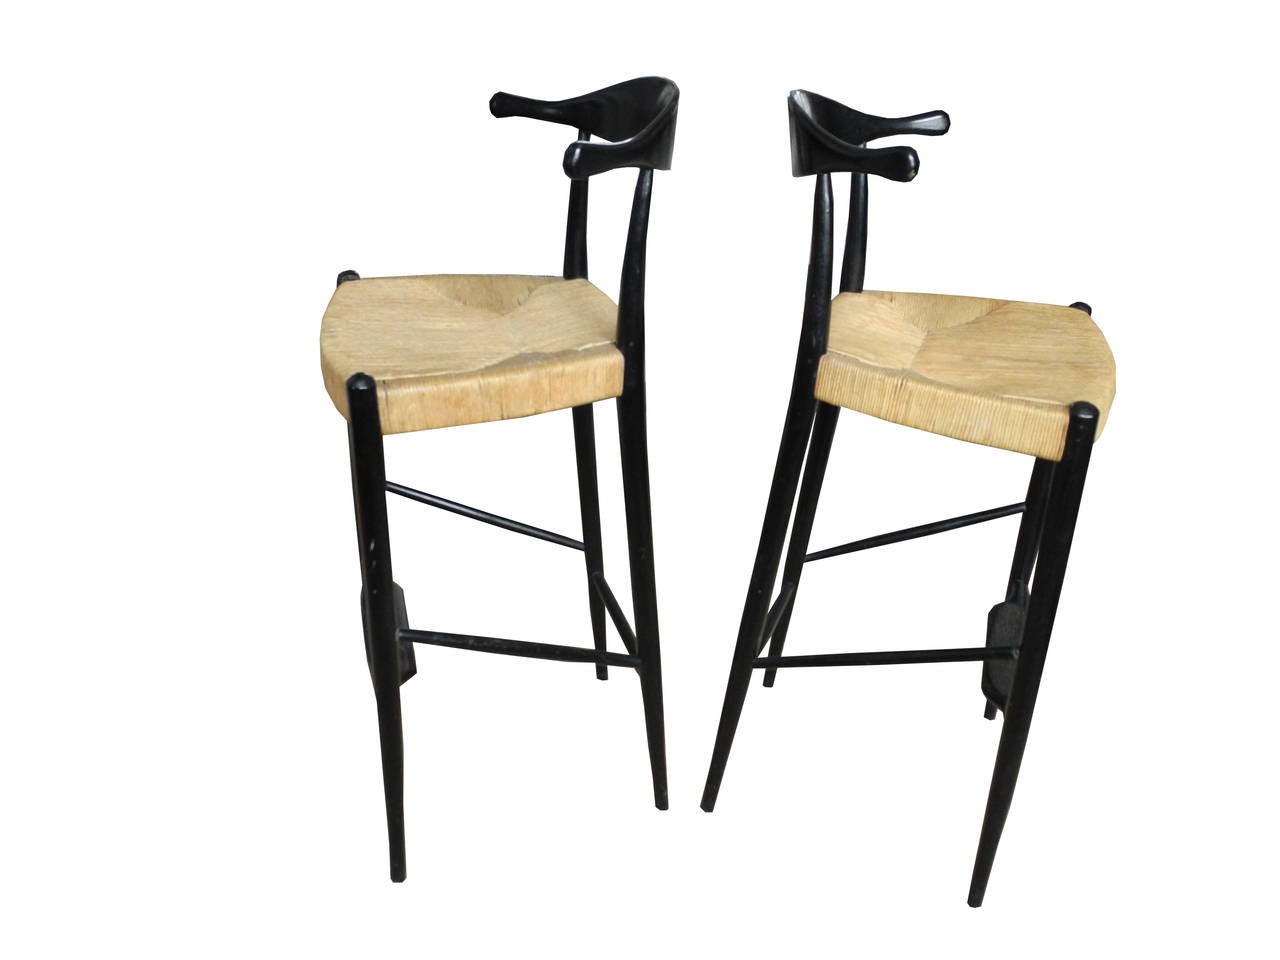 The bar stools are made of painted black wood. The paint is original.
The seats are rush. The backs are uniquely designed in Horn like shapes or ox bow, an American design from the late 1950s.
The seat height is 27.5